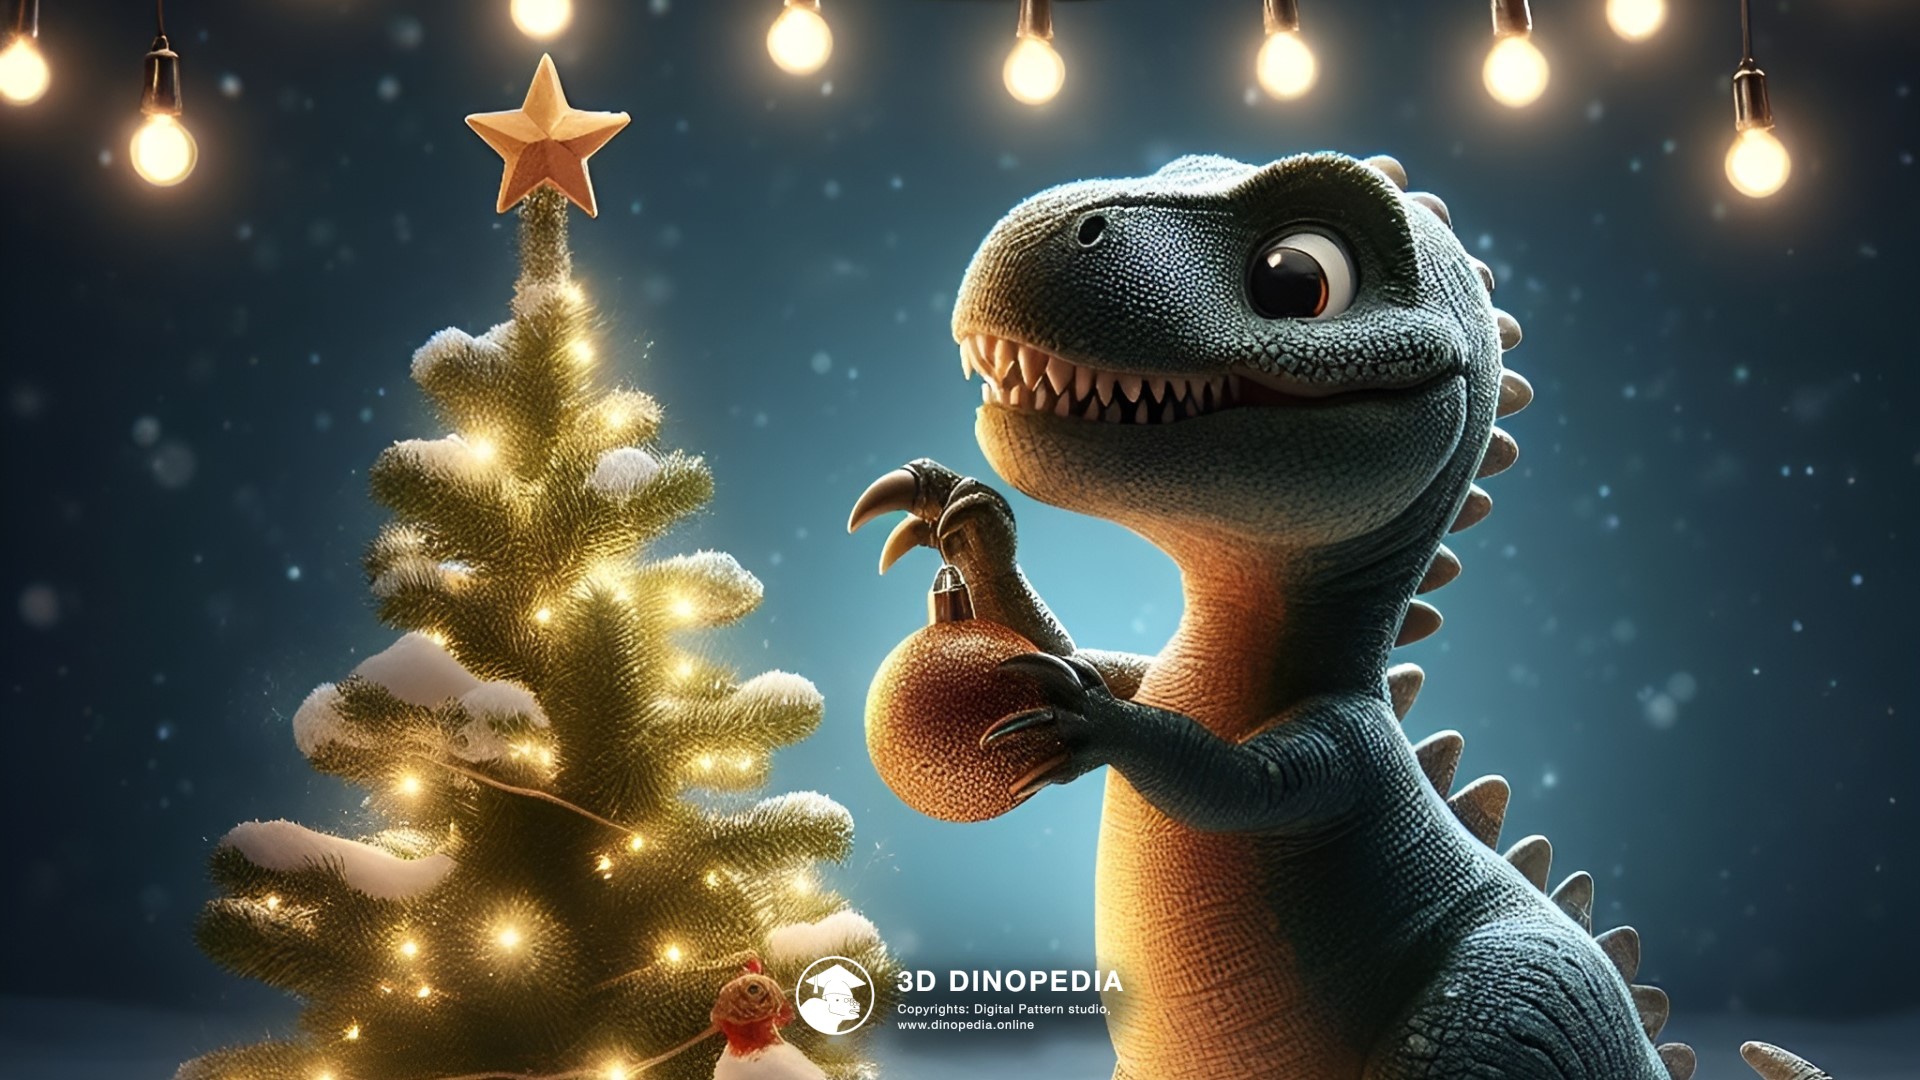 3D Dinopedia The Mysteries of the Christmas Tree - New wallpaper!